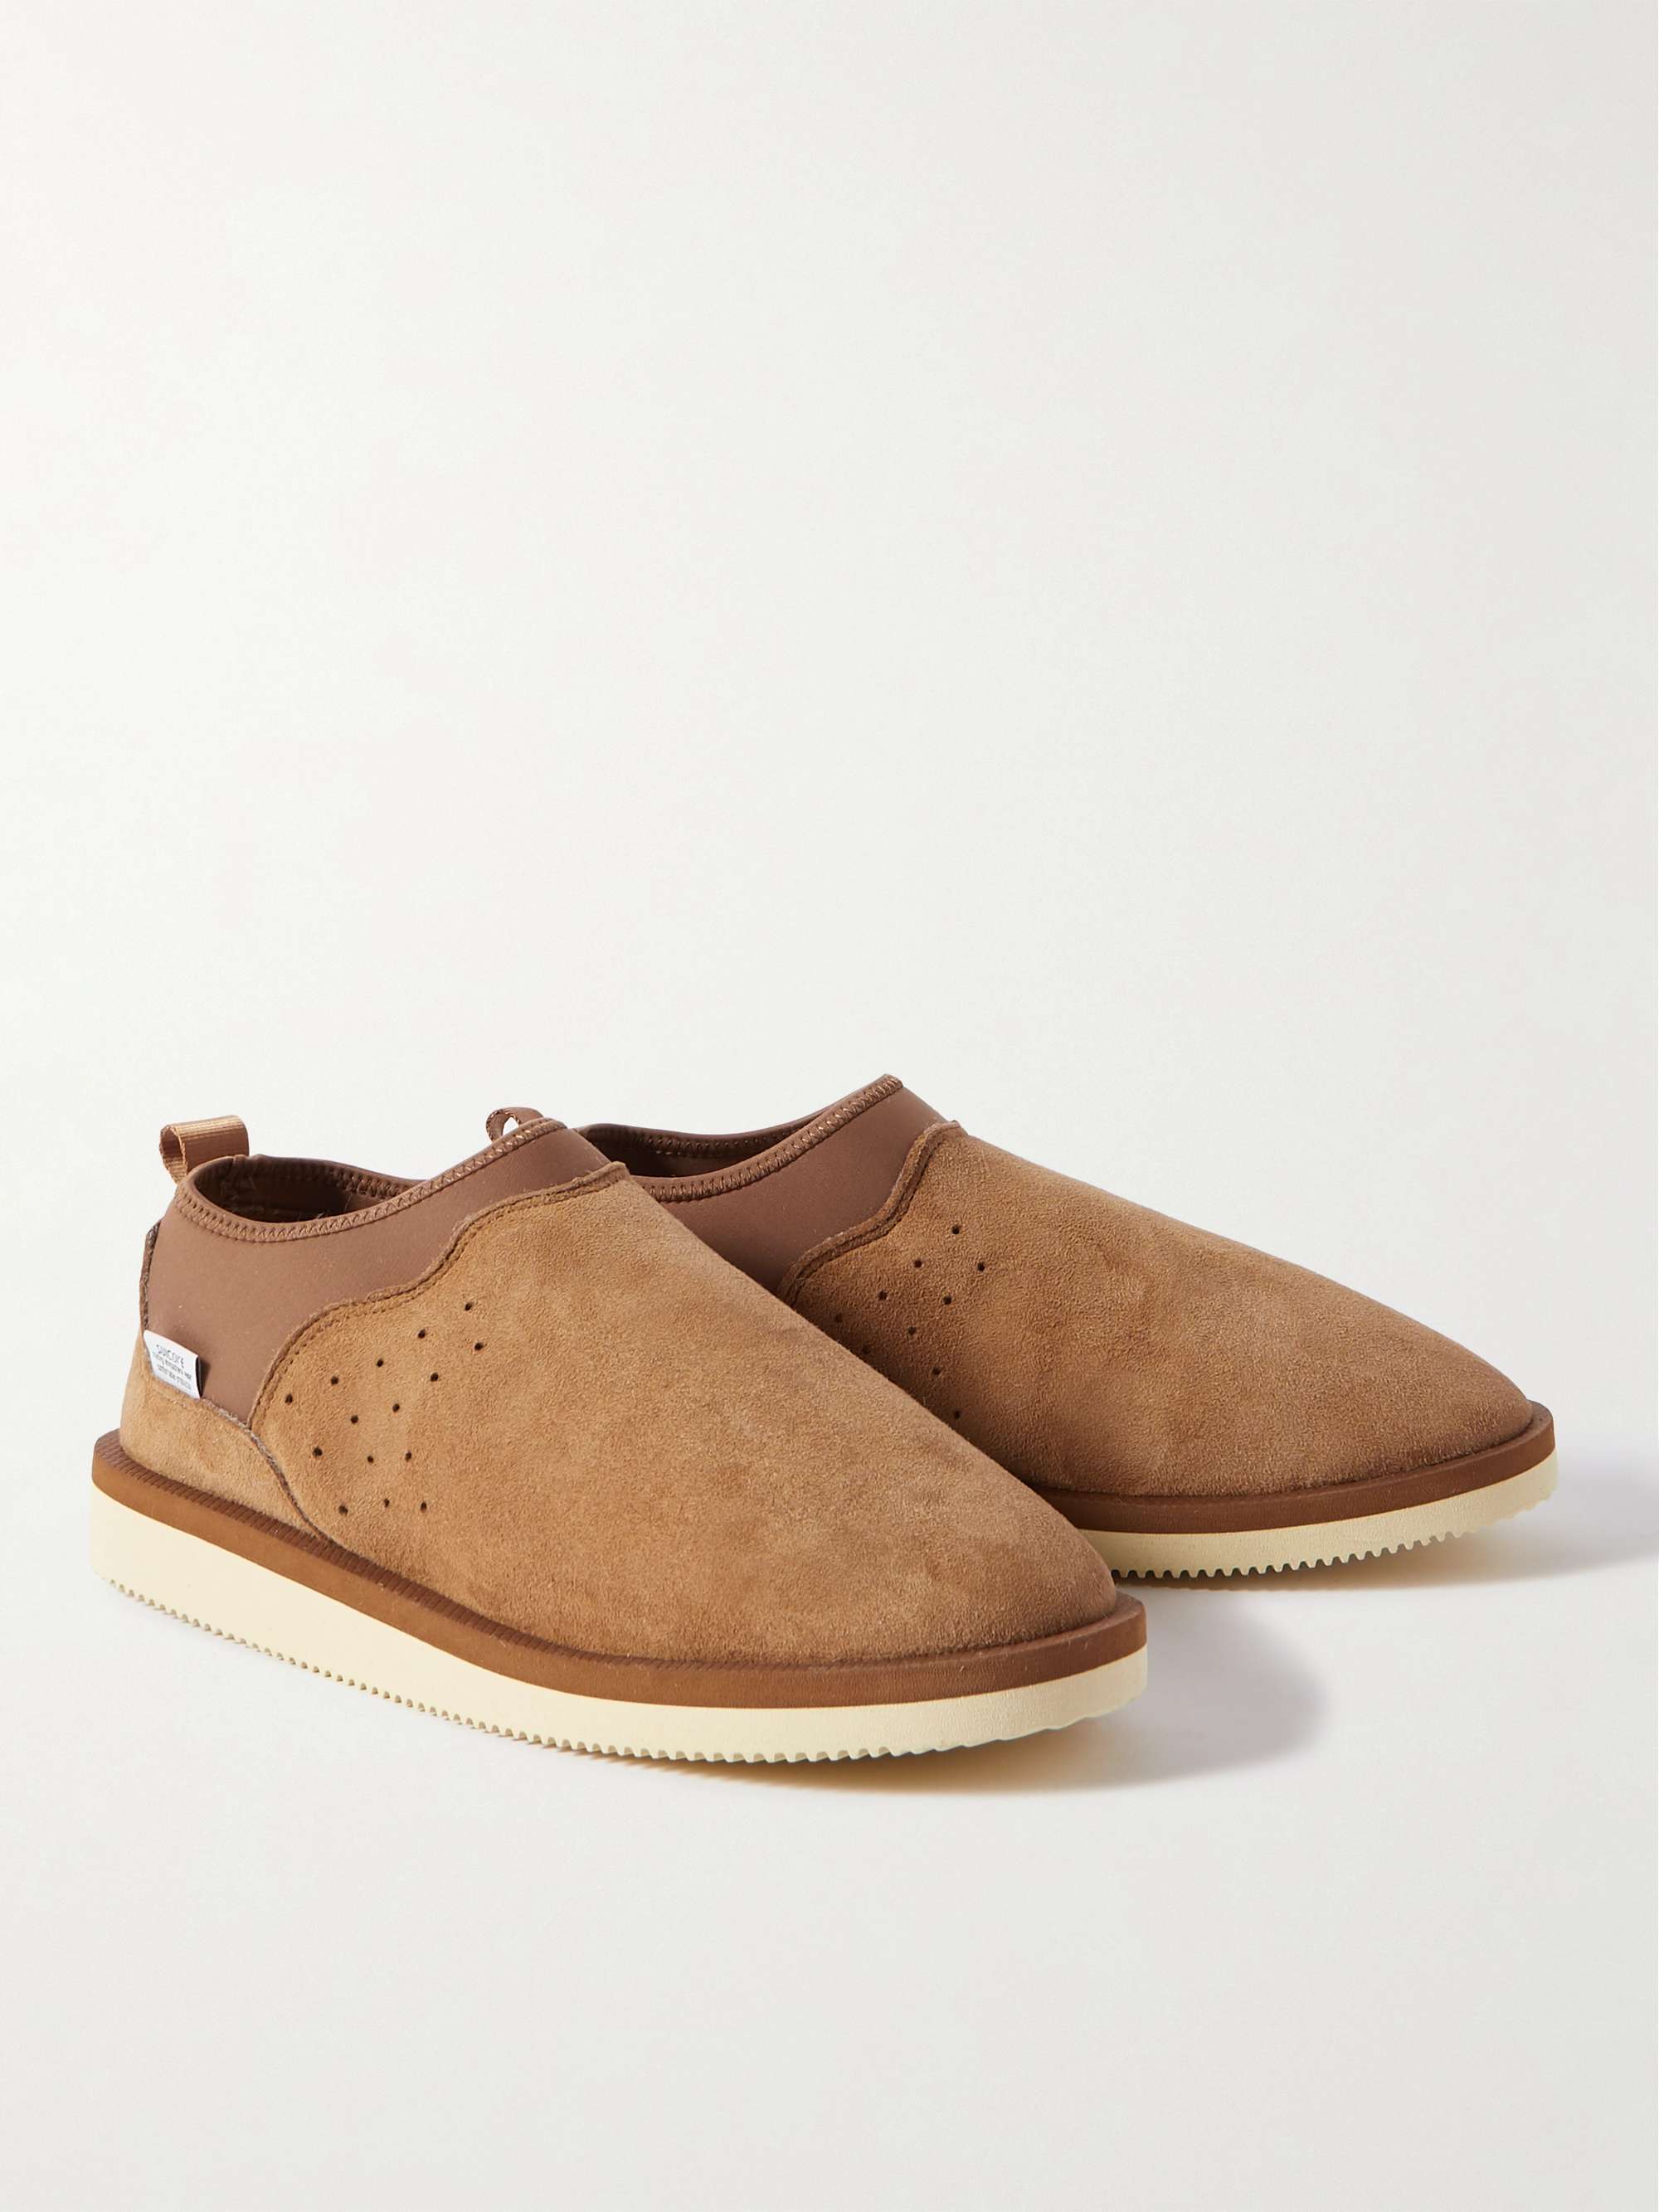 SUICOKE RON-M2ab-MID Shearling-Lined Suede and Jersey Slippers